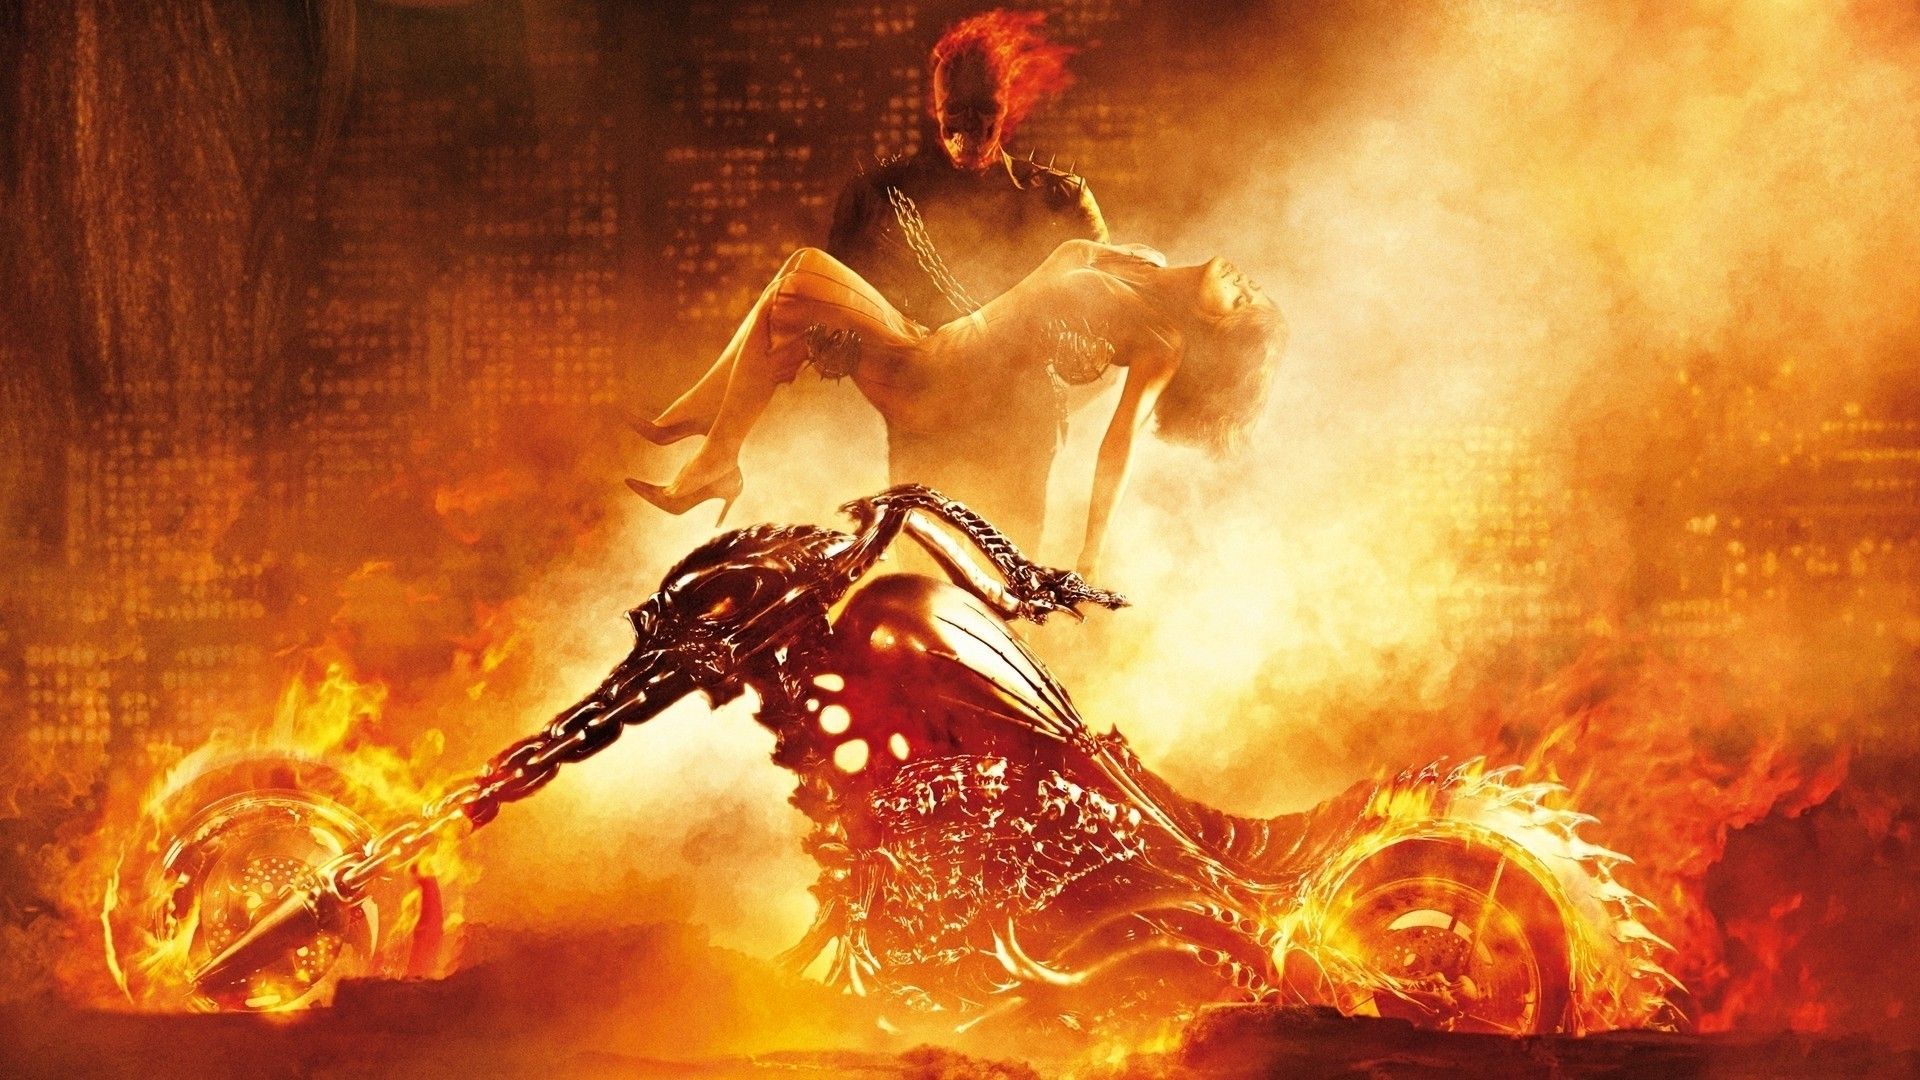 Ghost Rider HD Gorgeous Wallpaper Free HD Wallpaper - Download ...